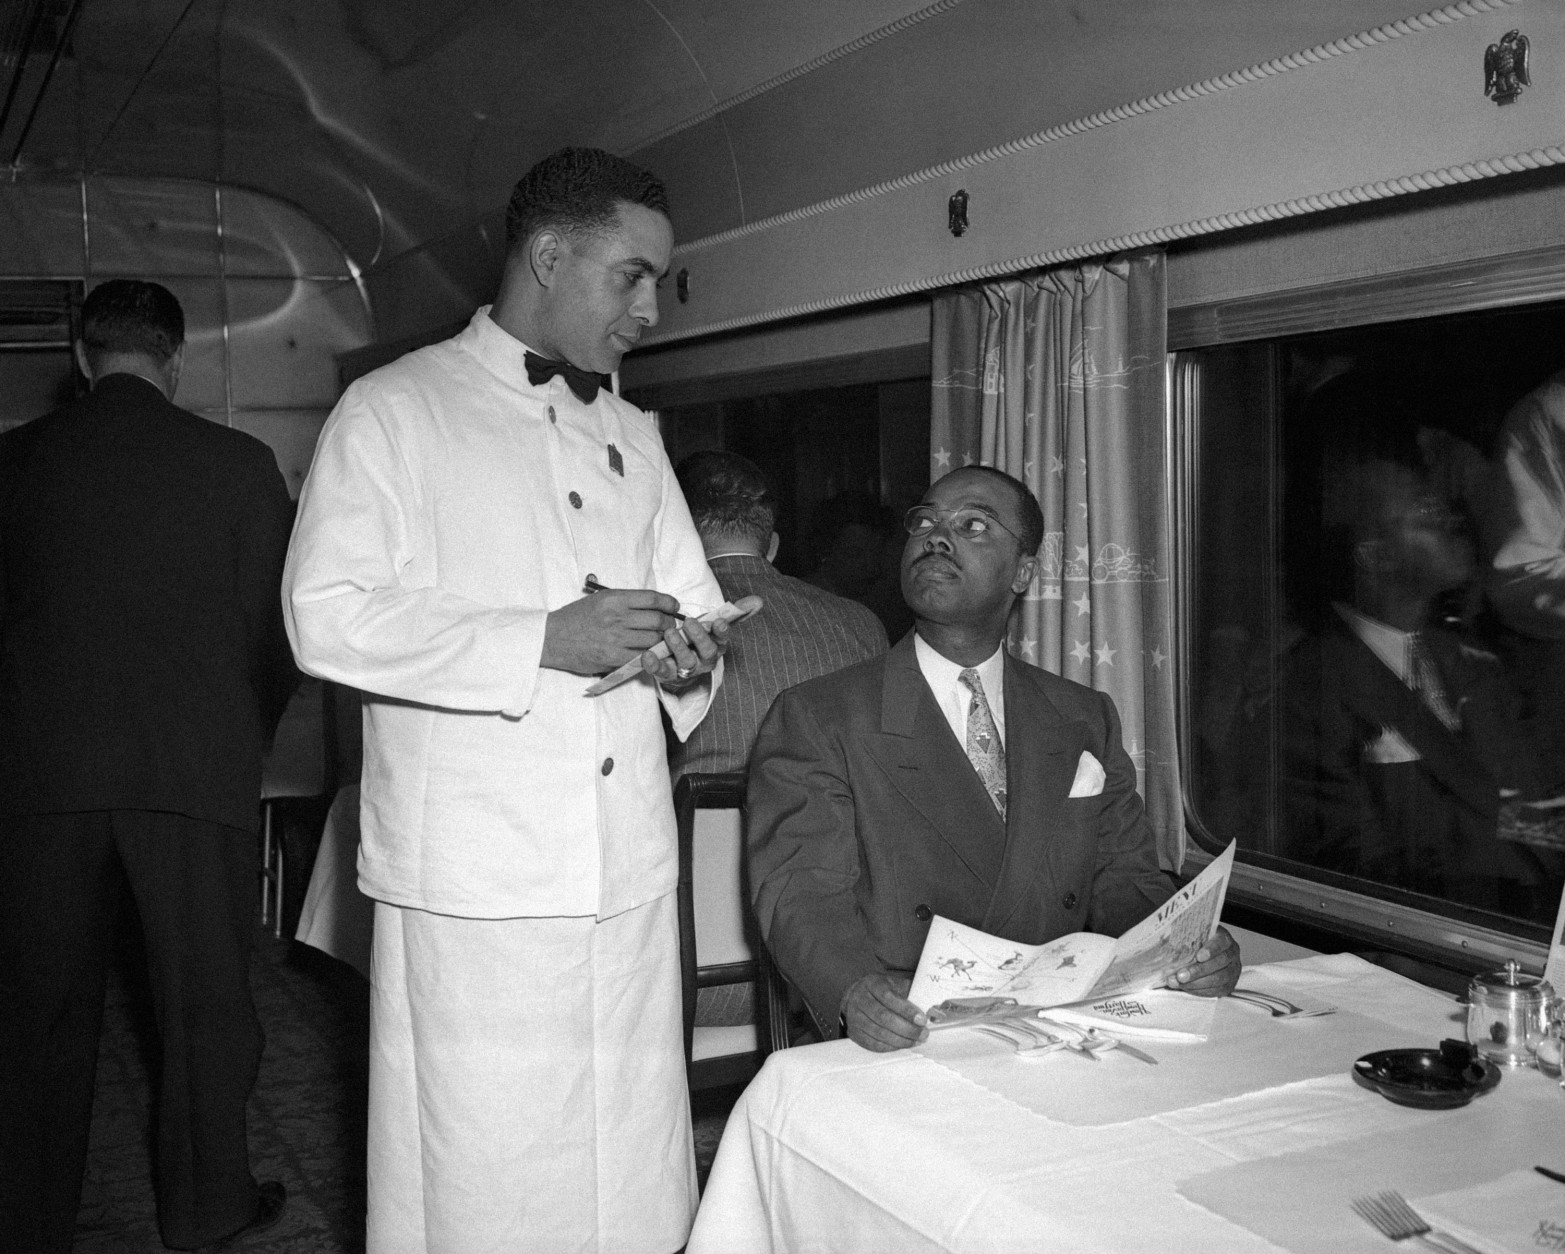 Elmer W. Henderson, seated, a Washington man whose lawsuit was the basis for a Supreme Court decision outlawing segregation in railroad dining cars, orders food from Stanford Peters, a dining car waiter, June 4, 1950.  Henderson, a director of the American Council for Human Rights, went directly from the Supreme Court building to Union Station in Washington to catch the train.  (AP Photo/William J. Smith)